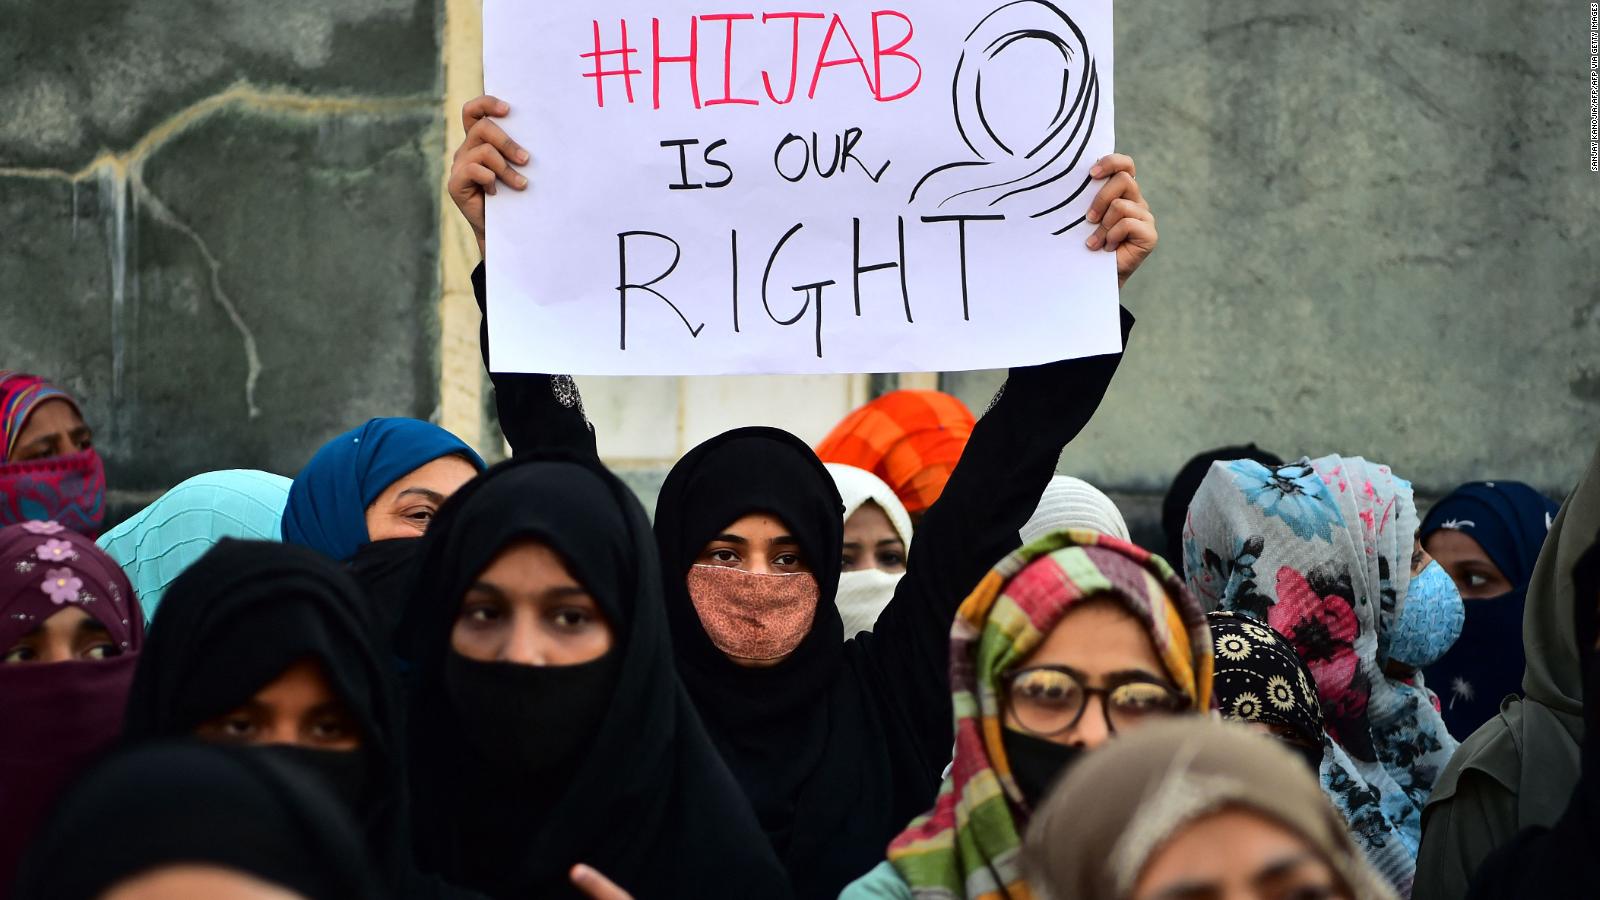 karnataka 'hijab row': protests spread in india as girls refuse to be told what not to wear - cnn